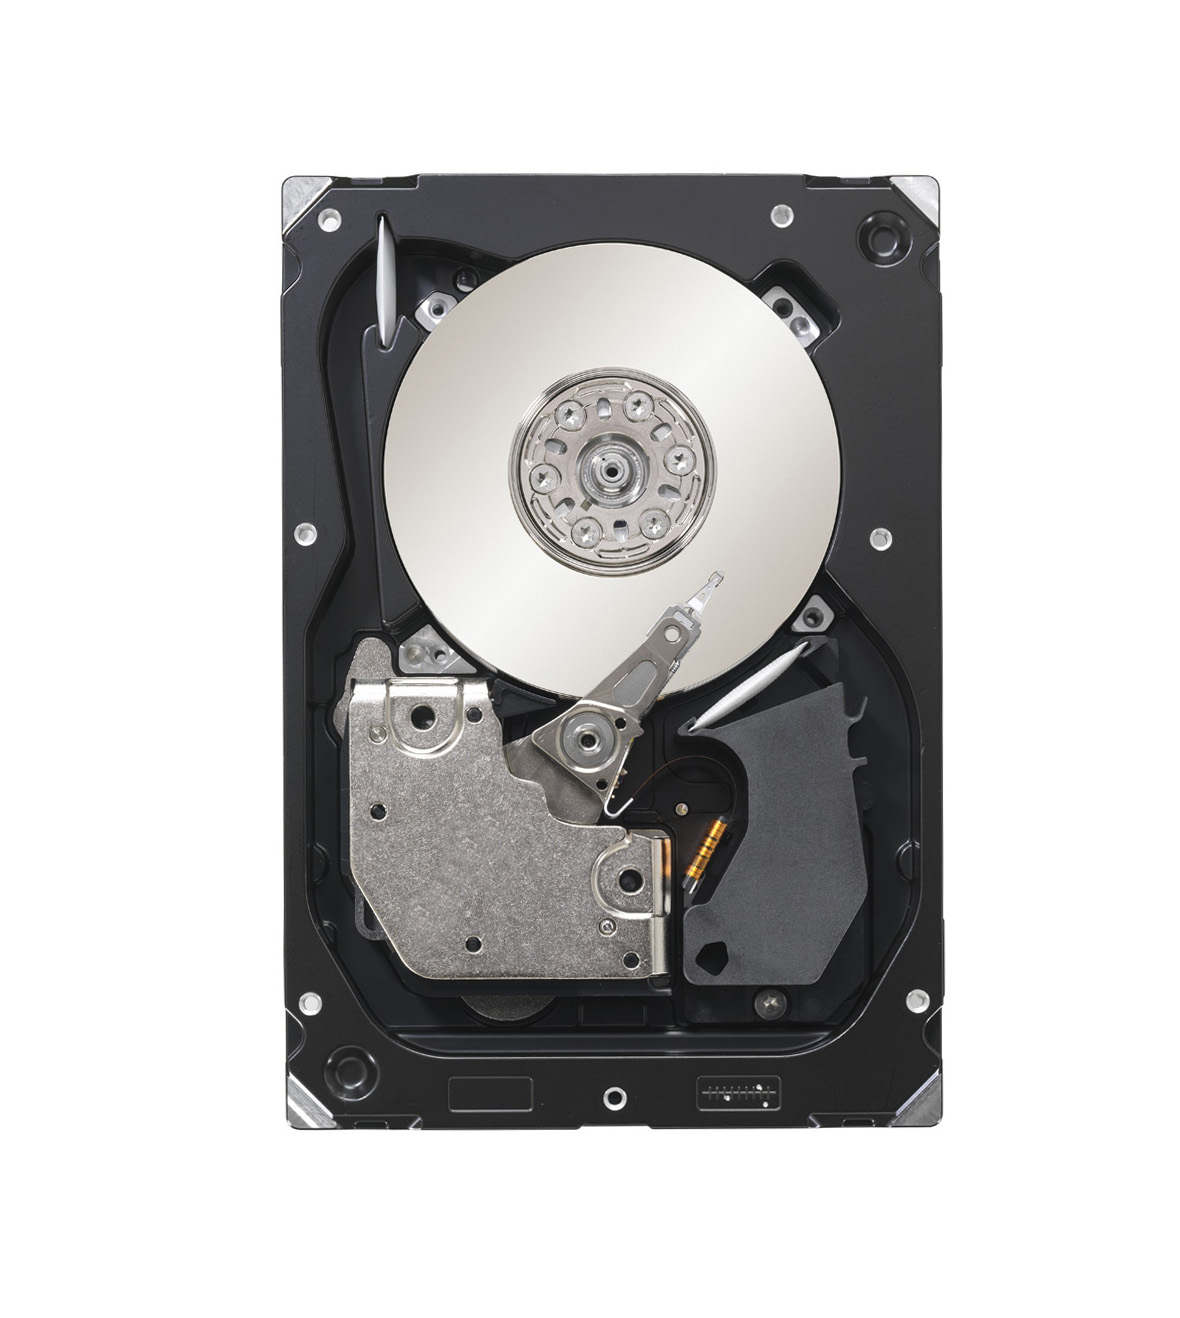 9ZM270-038 | Seagate 4TB 7200RPM SAS Gbps 3.5 128MB Cache Constellation Hard Drive